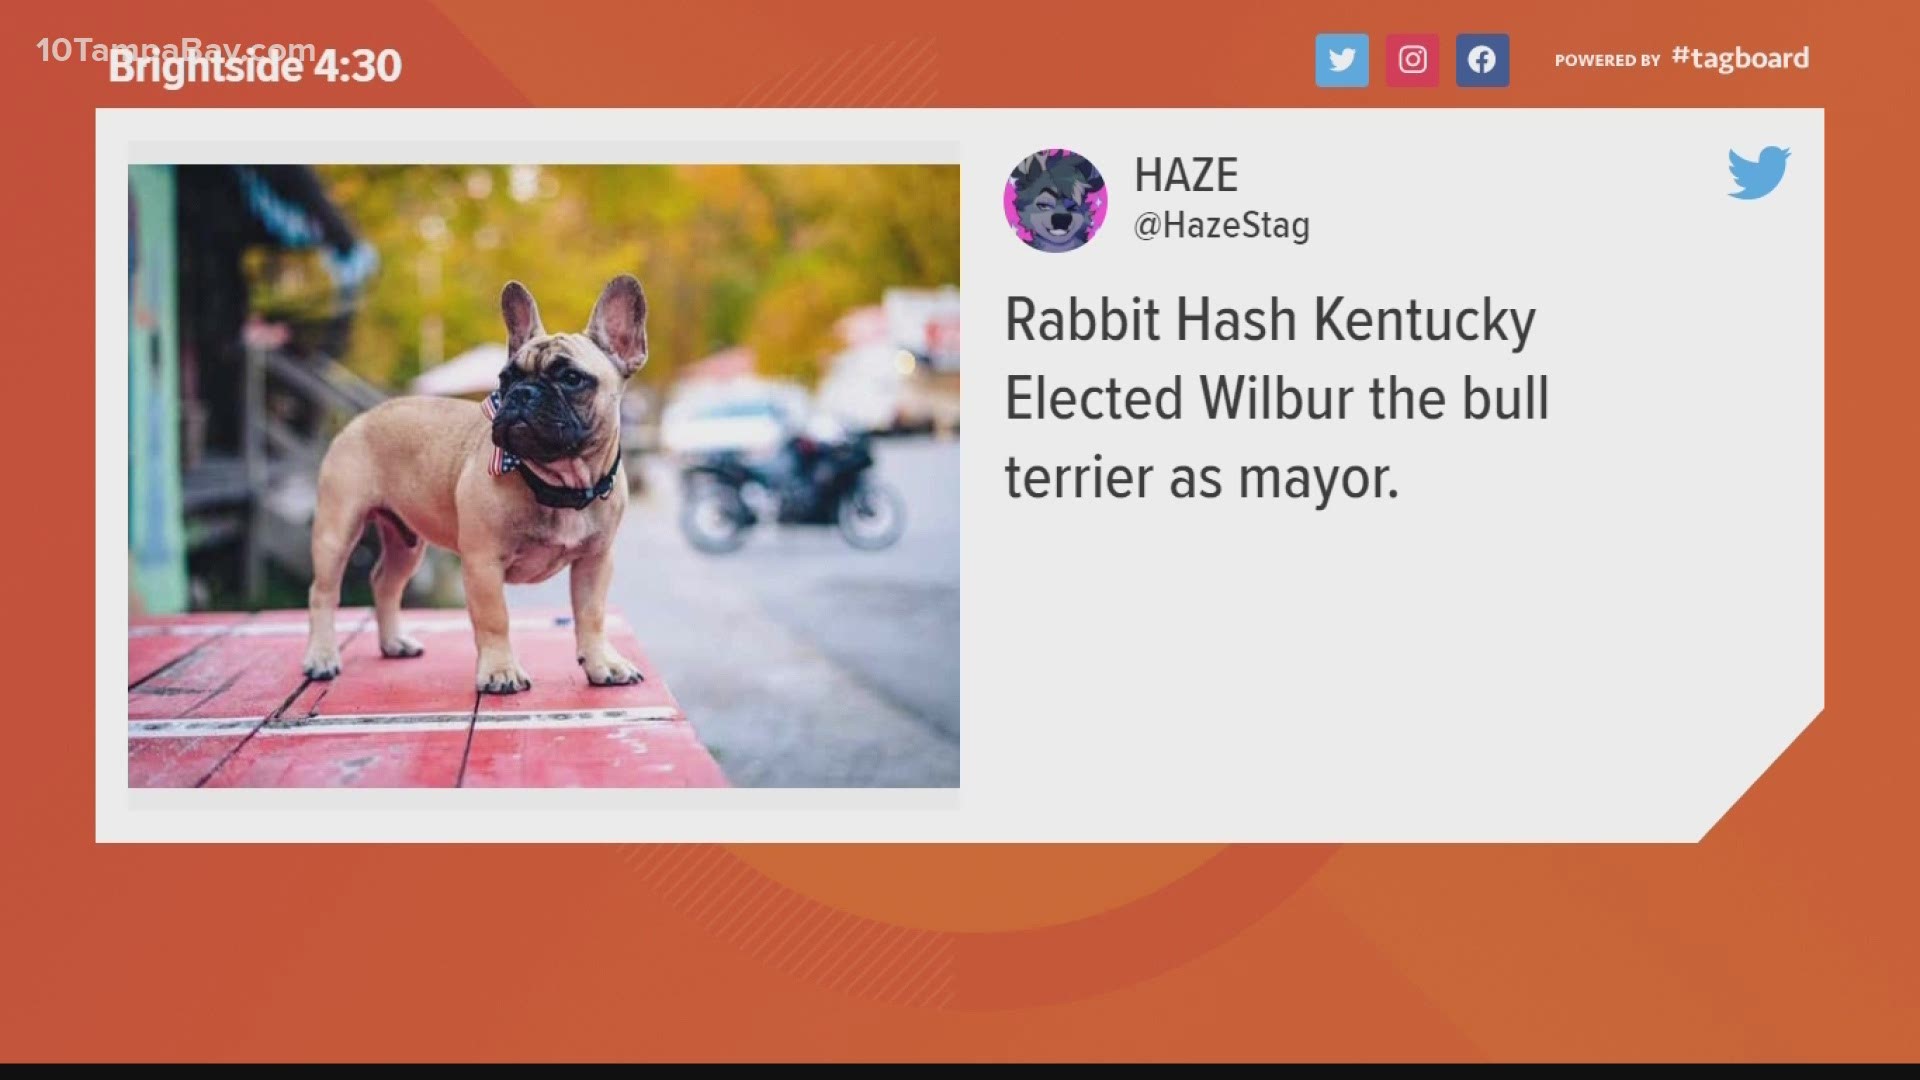 Wilbur Beast the French bulldog won the Rabbit Hash mayoral election in a landslide victory.